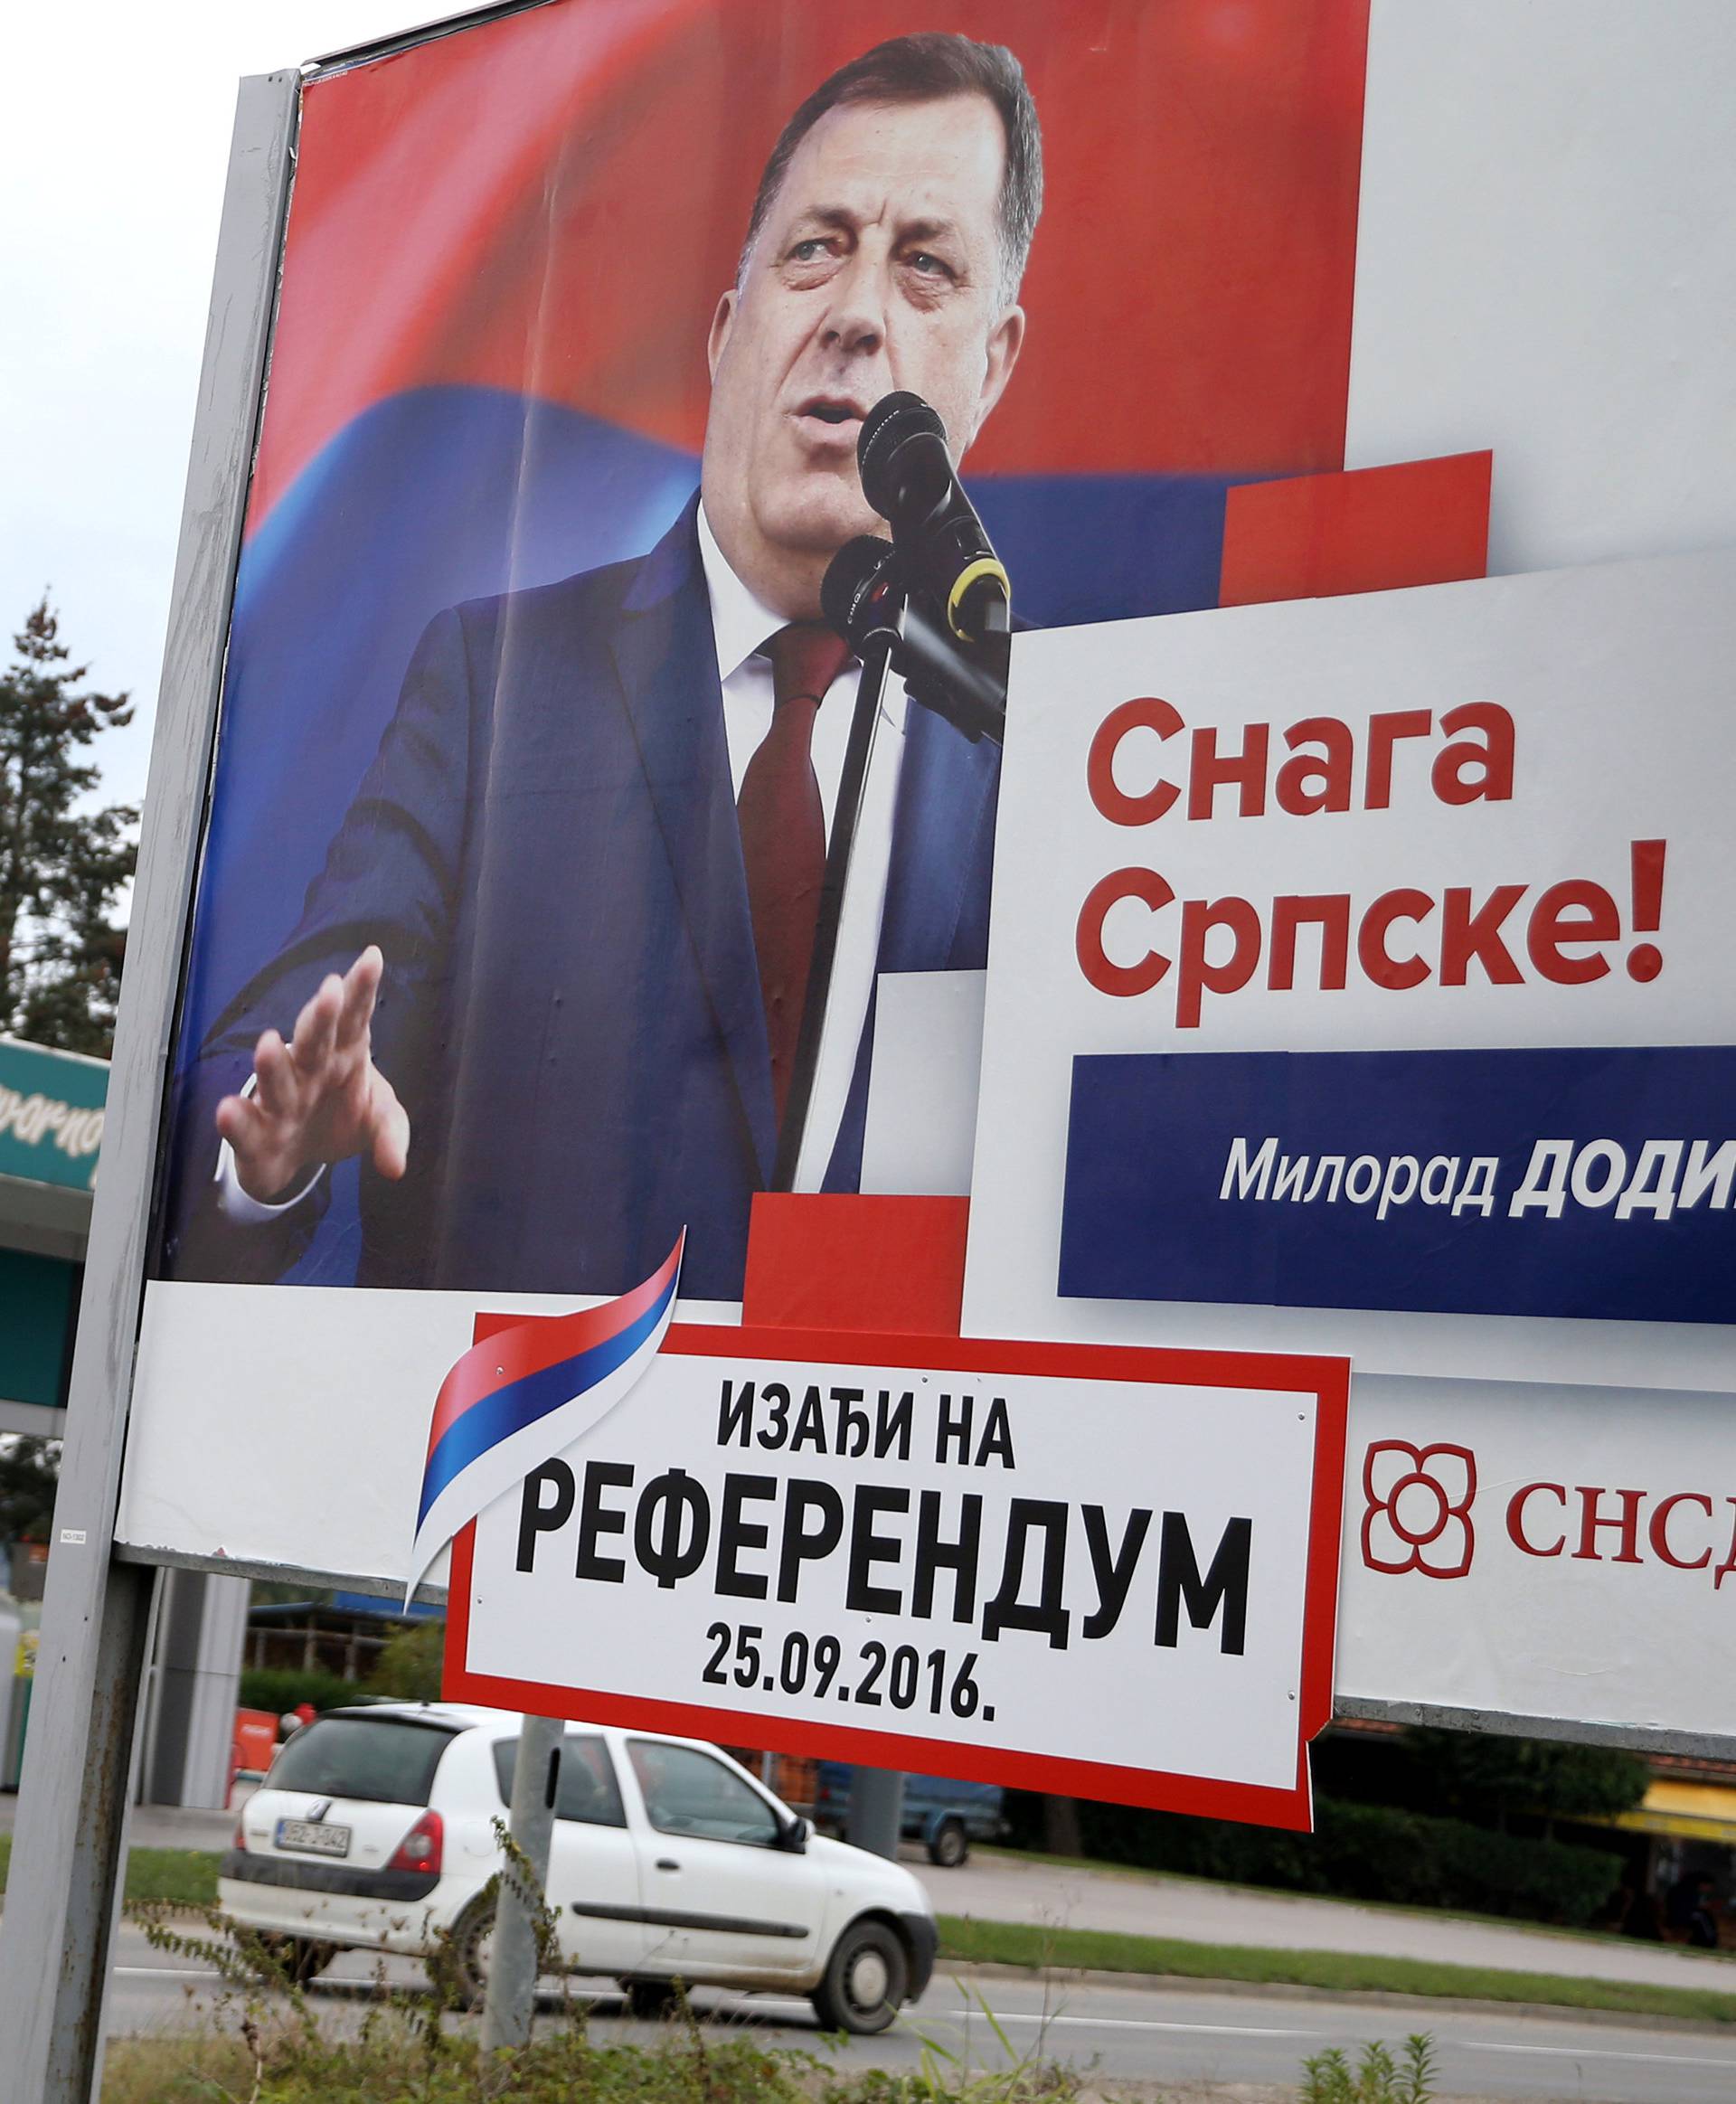 Milorad Dodik, President of Republika Srpska is pictured on an election poster calling for votes for a referendum on their Statehood Day in Prnjavor